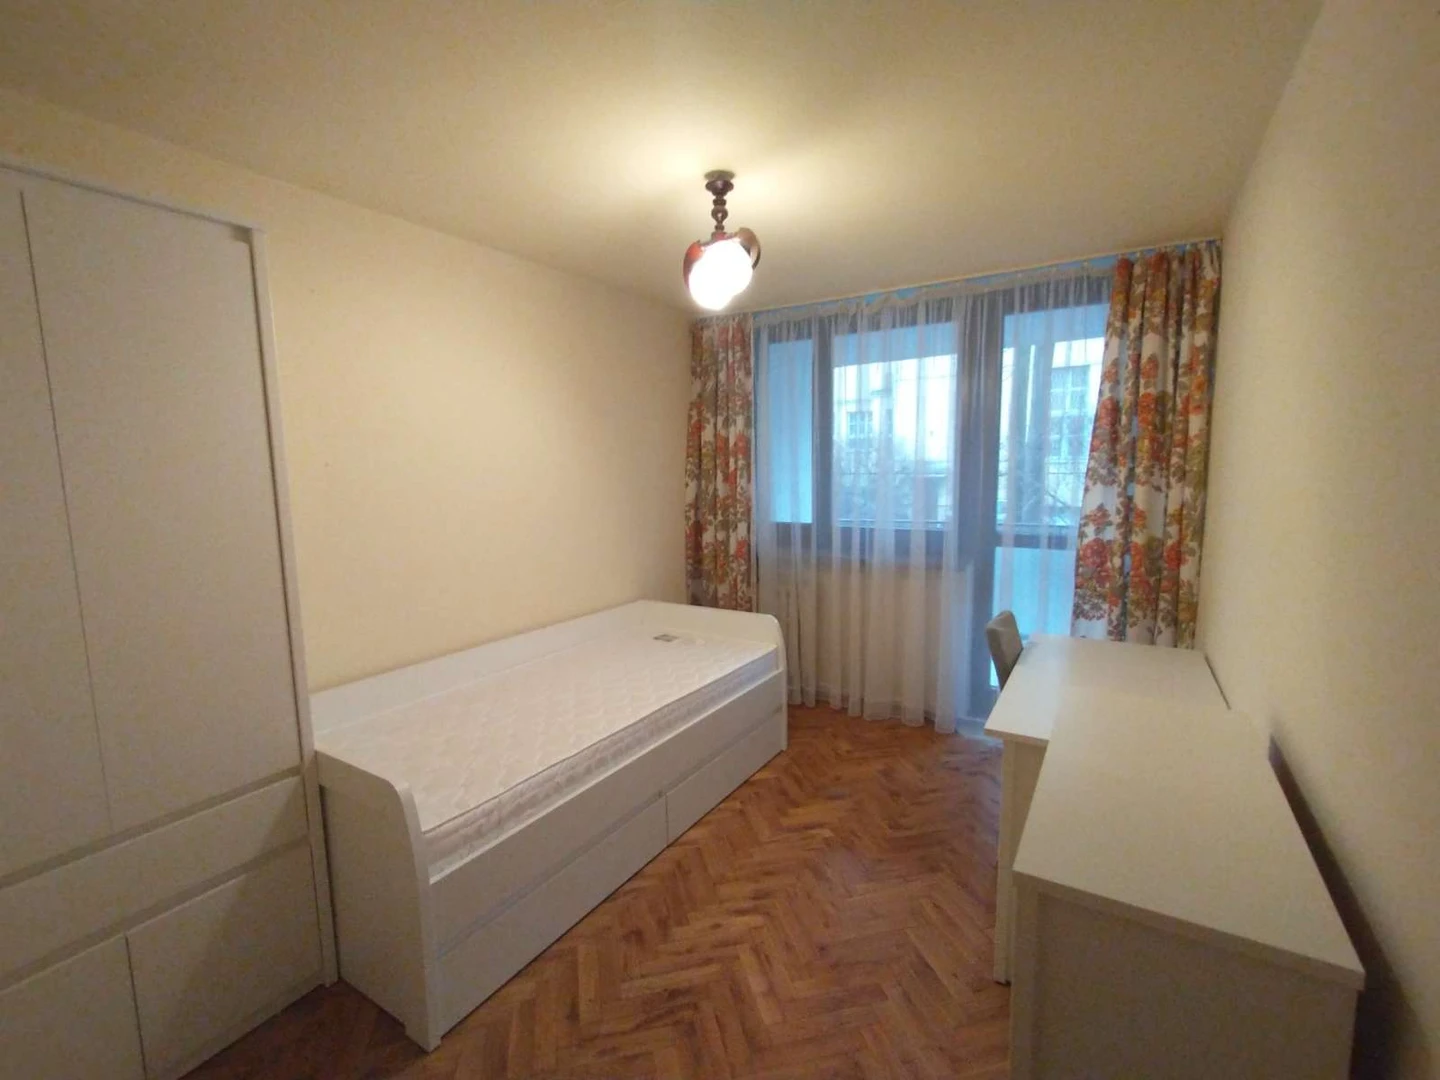 Room for rent with double bed lublin